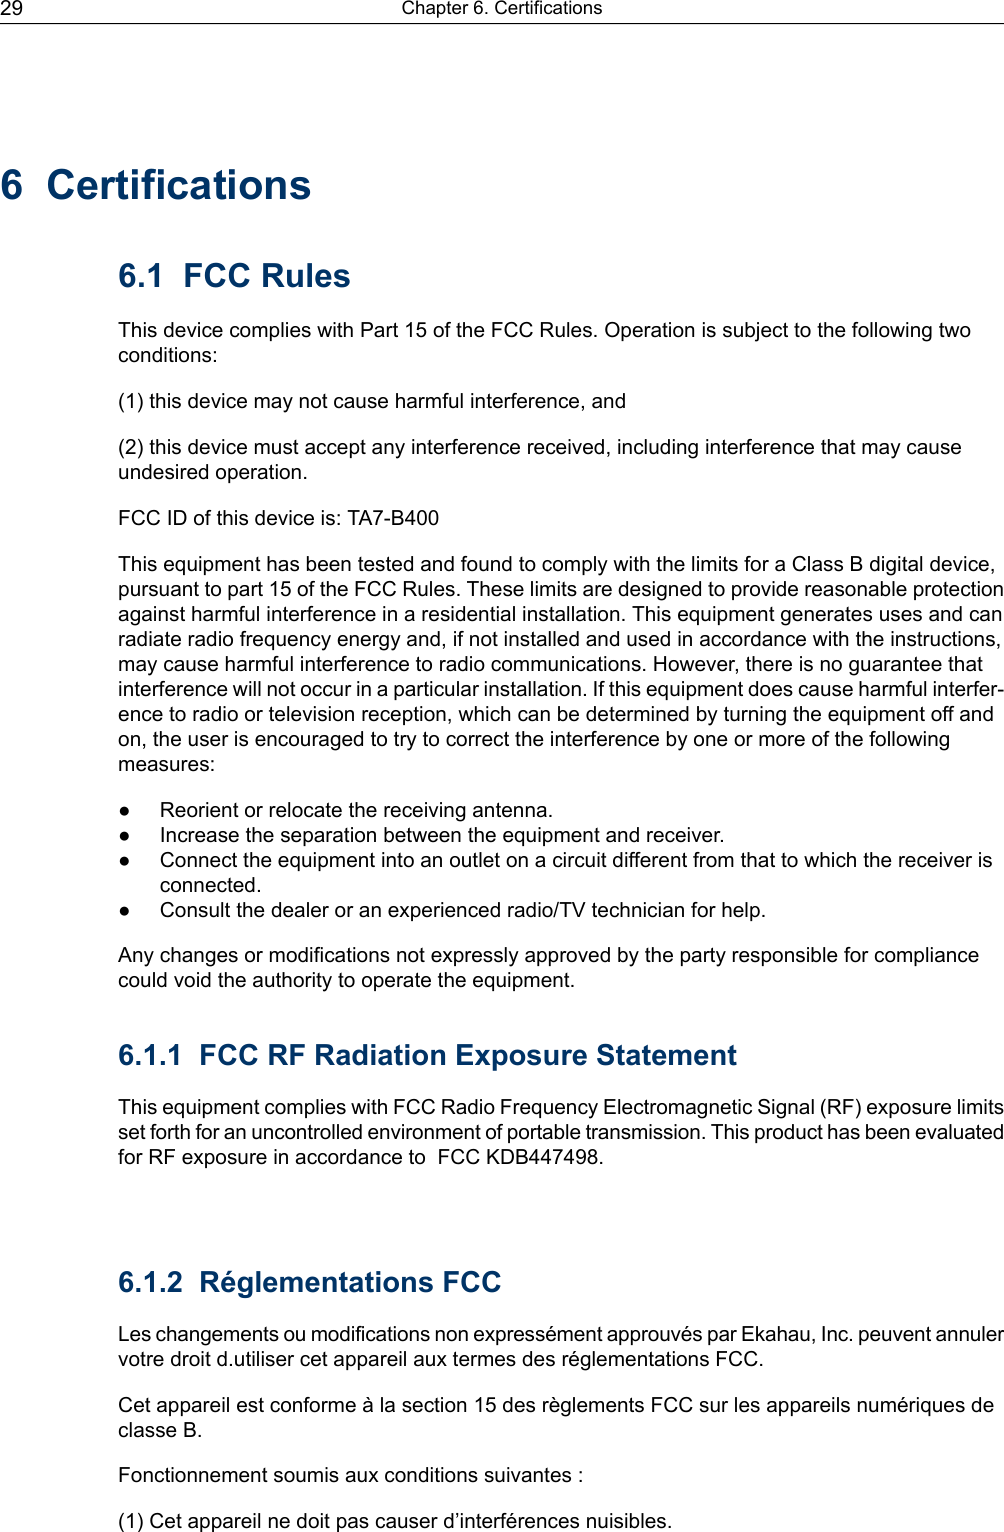 6 Certifications6.1 FCC RulesThis device complies with Part 15 of the FCC Rules. Operation is subject to the following twoconditions:(1) this device may not cause harmful interference, and(2) this device must accept any interference received, including interference that may causeundesired operation.FCC ID of this device is: TA7-B400This equipment has been tested and found to comply with the limits for a Class B digital device,pursuant to part 15 of the FCC Rules. These limits are designed to provide reasonable protectionagainst harmful interference in a residential installation. This equipment generates uses and canradiate radio frequency energy and, if not installed and used in accordance with the instructions,may cause harmful interference to radio communications. However, there is no guarantee thatinterference will not occur in a particular installation. If this equipment does cause harmful interfer-ence to radio or television reception, which can be determined by turning the equipment off andon, the user is encouraged to try to correct the interference by one or more of the followingmeasures:● Reorient or relocate the receiving antenna.● Increase the separation between the equipment and receiver.● Connect the equipment into an outlet on a circuit different from that to which the receiver isconnected.● Consult the dealer or an experienced radio/TV technician for help.Any changes or modifications not expressly approved by the party responsible for compliancecould void the authority to operate the equipment.6.1.1 FCC RF Radiation Exposure Statement6.1.2 Réglementations FCCLes changements ou modifications non expressément approuvés par Ekahau, Inc. peuvent annulervotre droit d.utiliser cet appareil aux termes des réglementations FCC.Cet appareil est conforme à la section 15 des règlements FCC sur les appareils numériques declasse B.Fonctionnement soumis aux conditions suivantes :(1) Cet appareil ne doit pas causer d’interférences nuisibles.Chapter 6. Certifications29This equipment complies with FCC Radio Frequency Electromagnetic Signal (RF) exposure limitsset forth for an uncontrolled environment of portable transmission. This product has been evaluatedfor RF exposure in accordance to  FCC KDB447498.